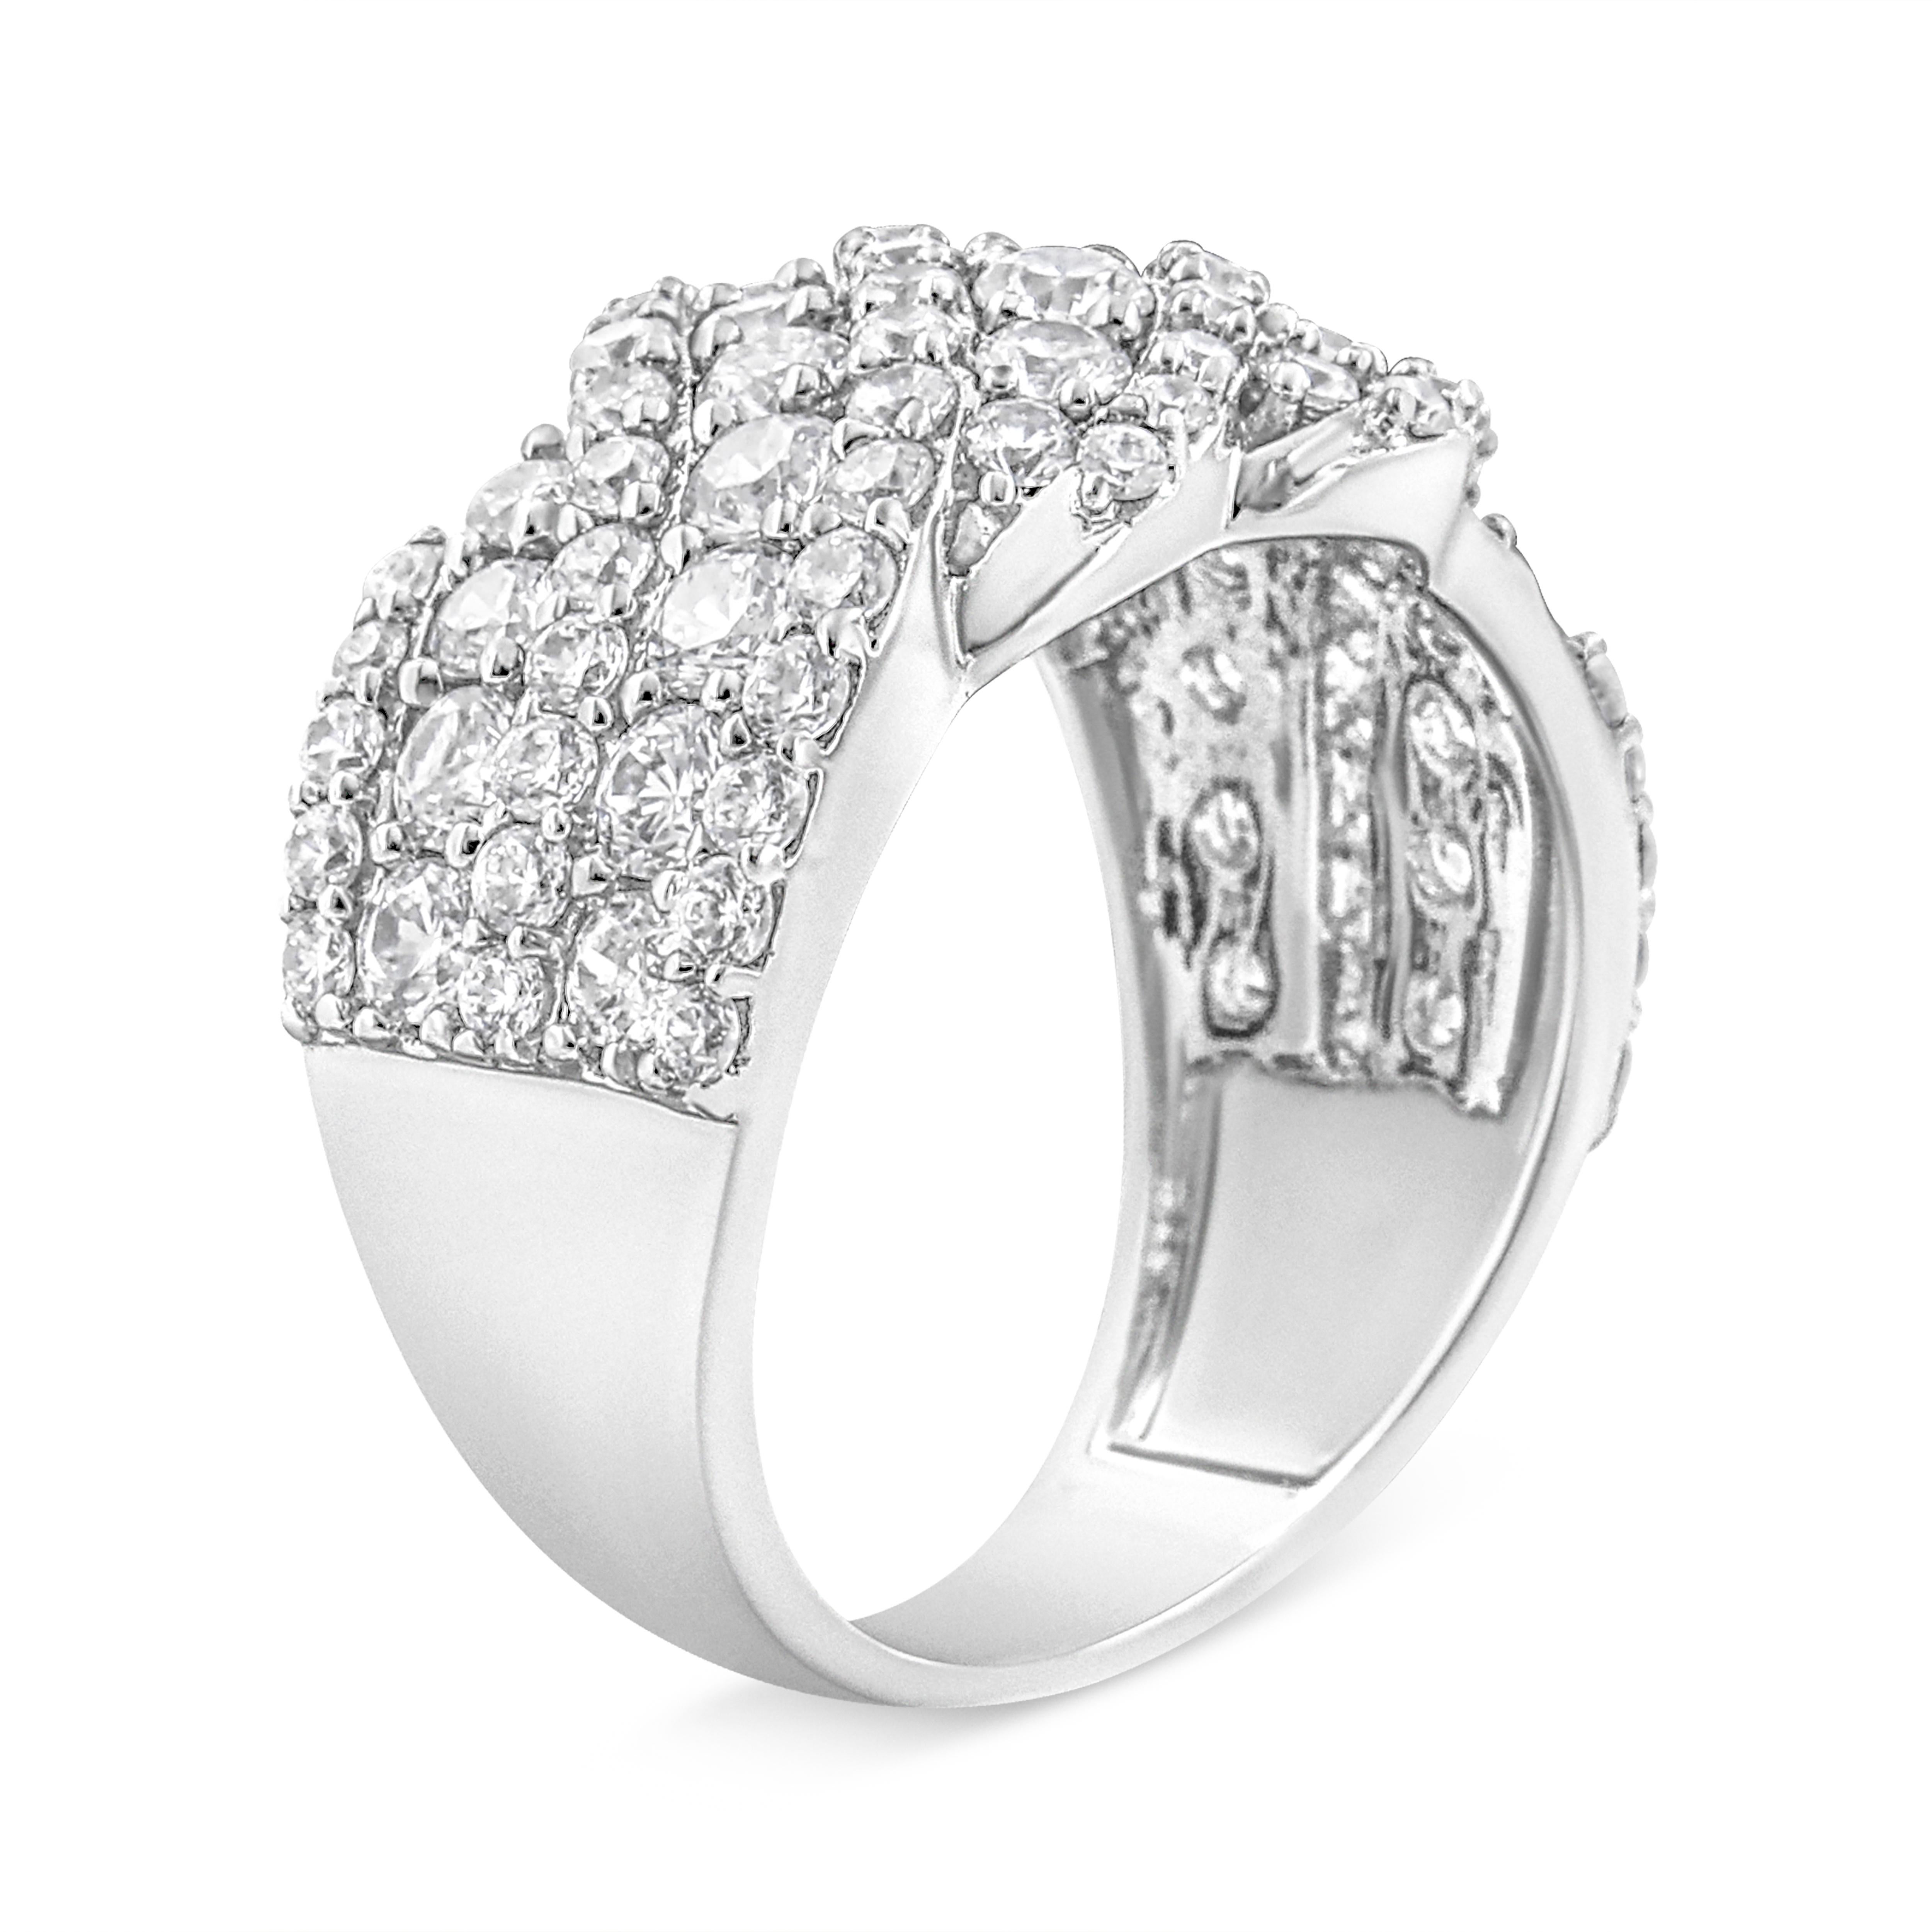 For Sale:  10K White Gold 3.00 Carat Diamond Multi Row Cluster Band Ring 3